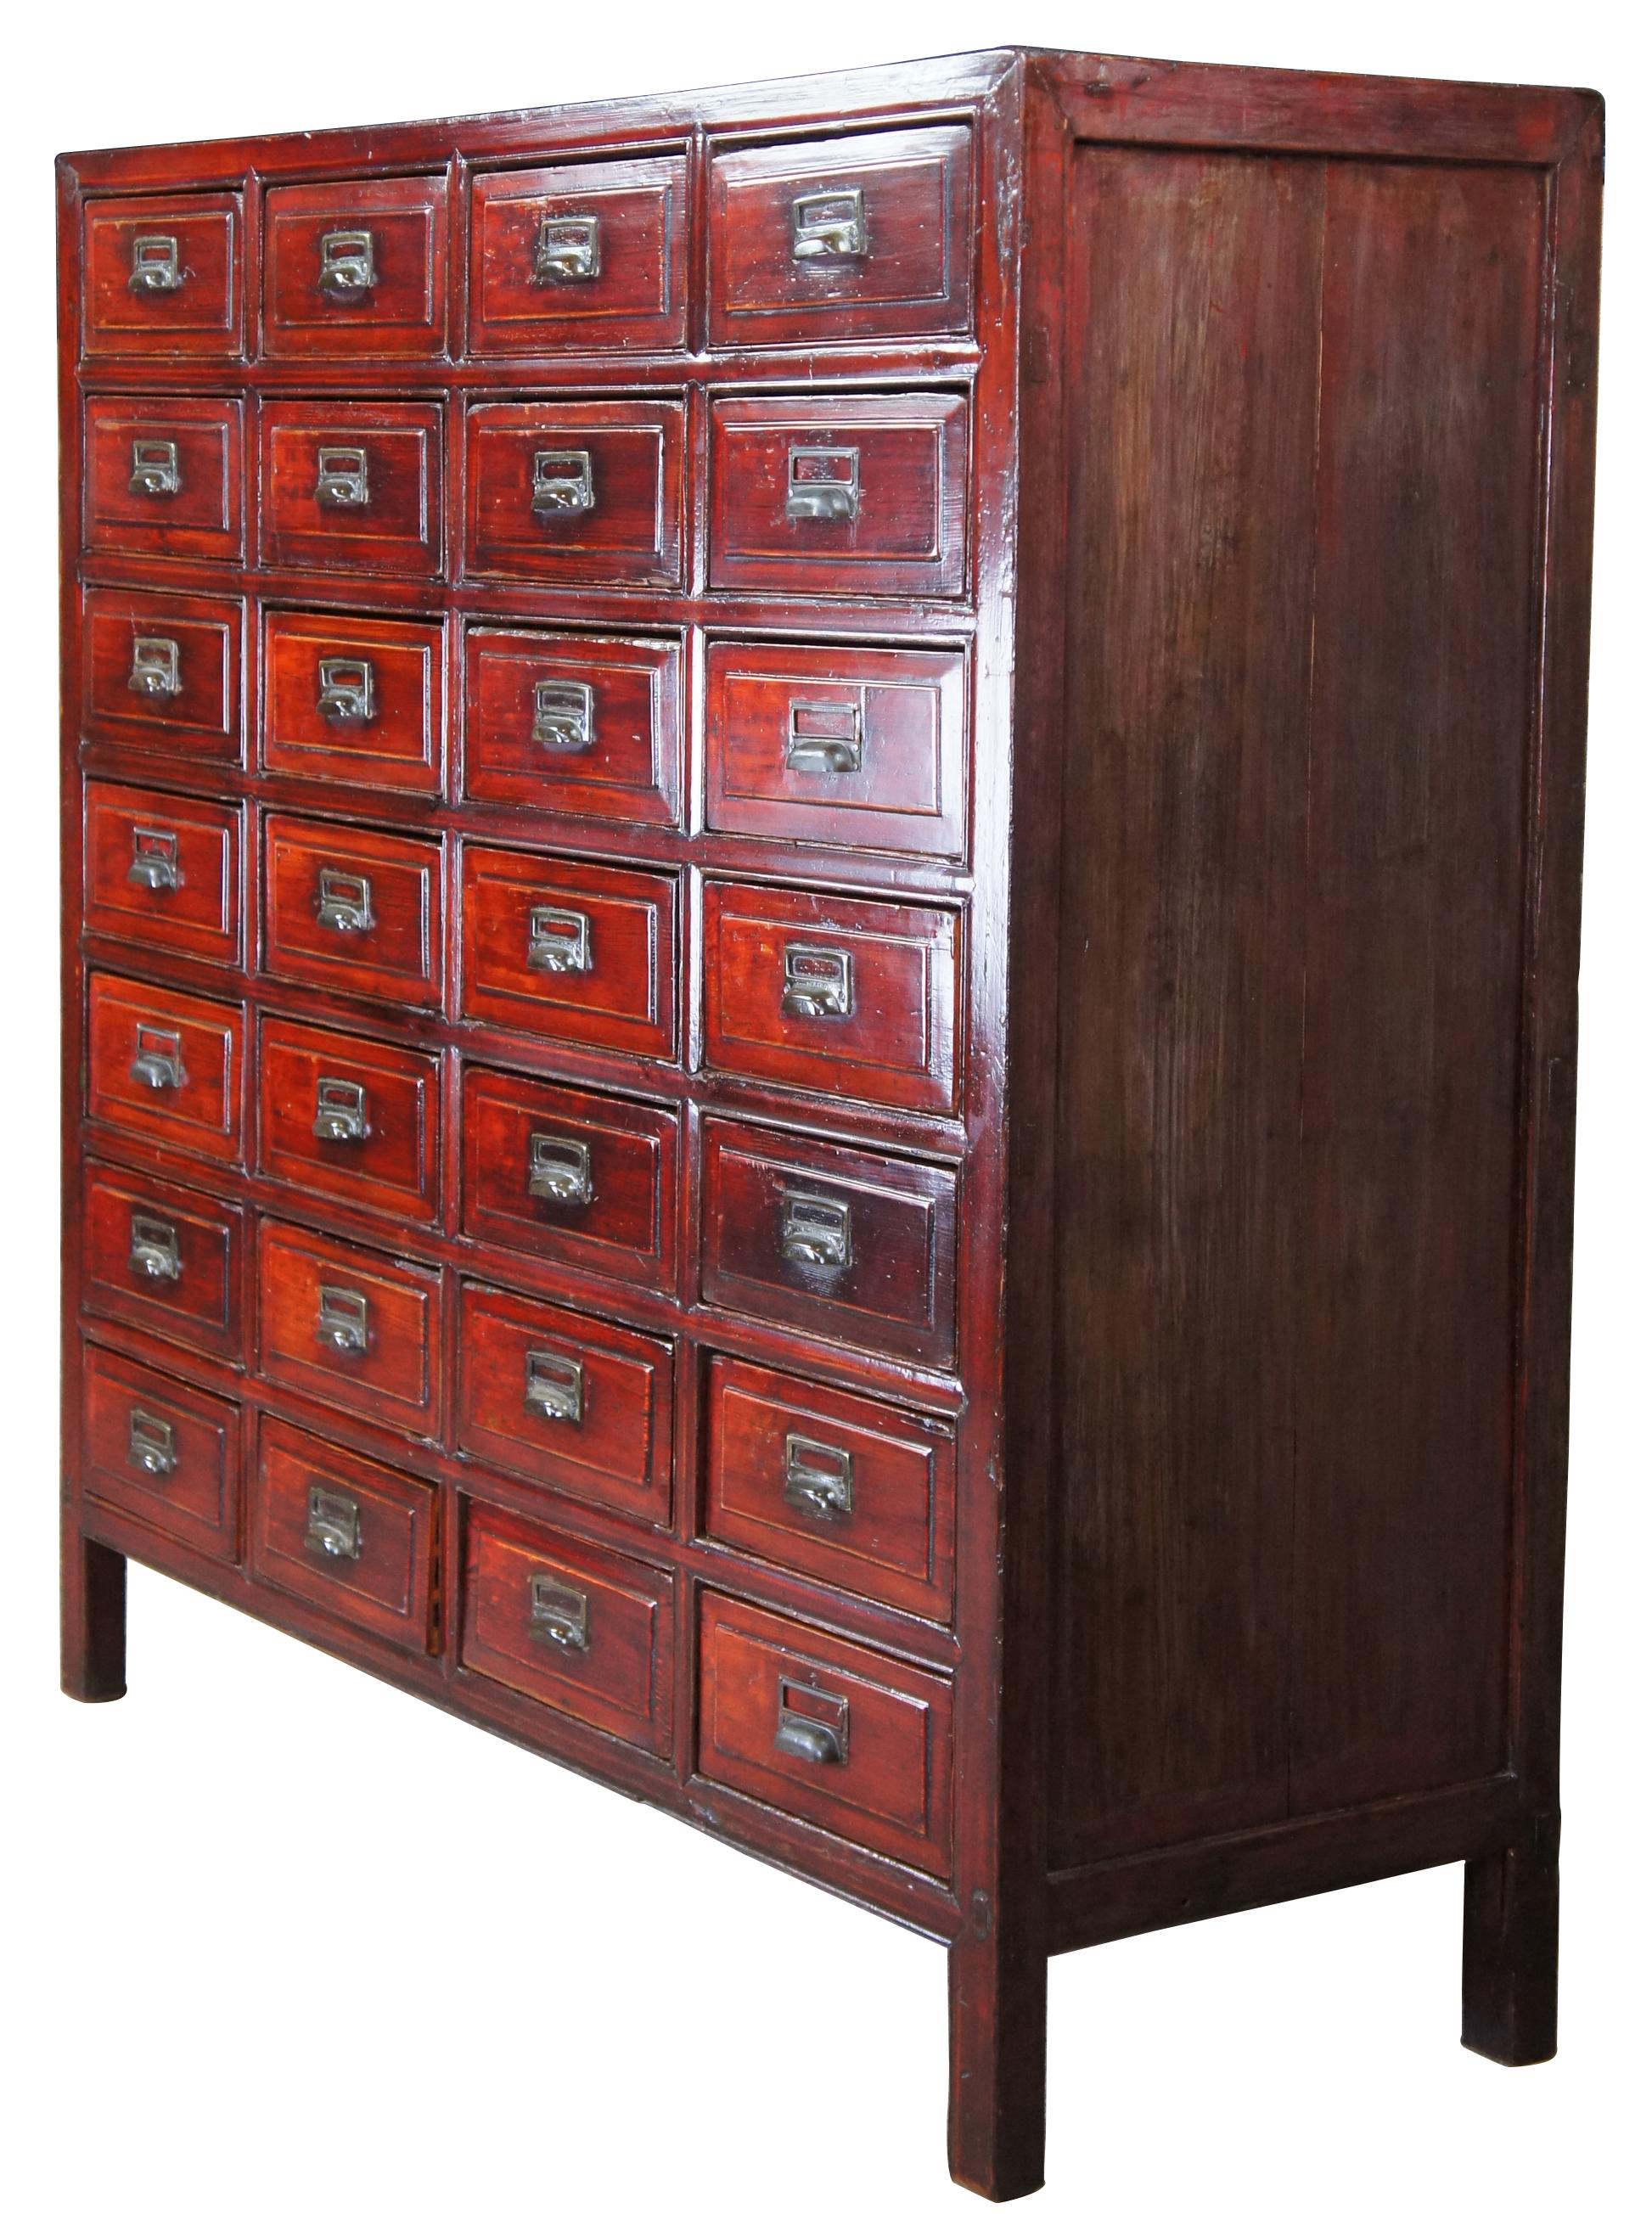 Chinese apothecary, pharmacy or medicine chest, circa 19th century. Made from lacquered elm with mortise and tenon construction. Features 28 partitioned drawers with metal hardware.
  